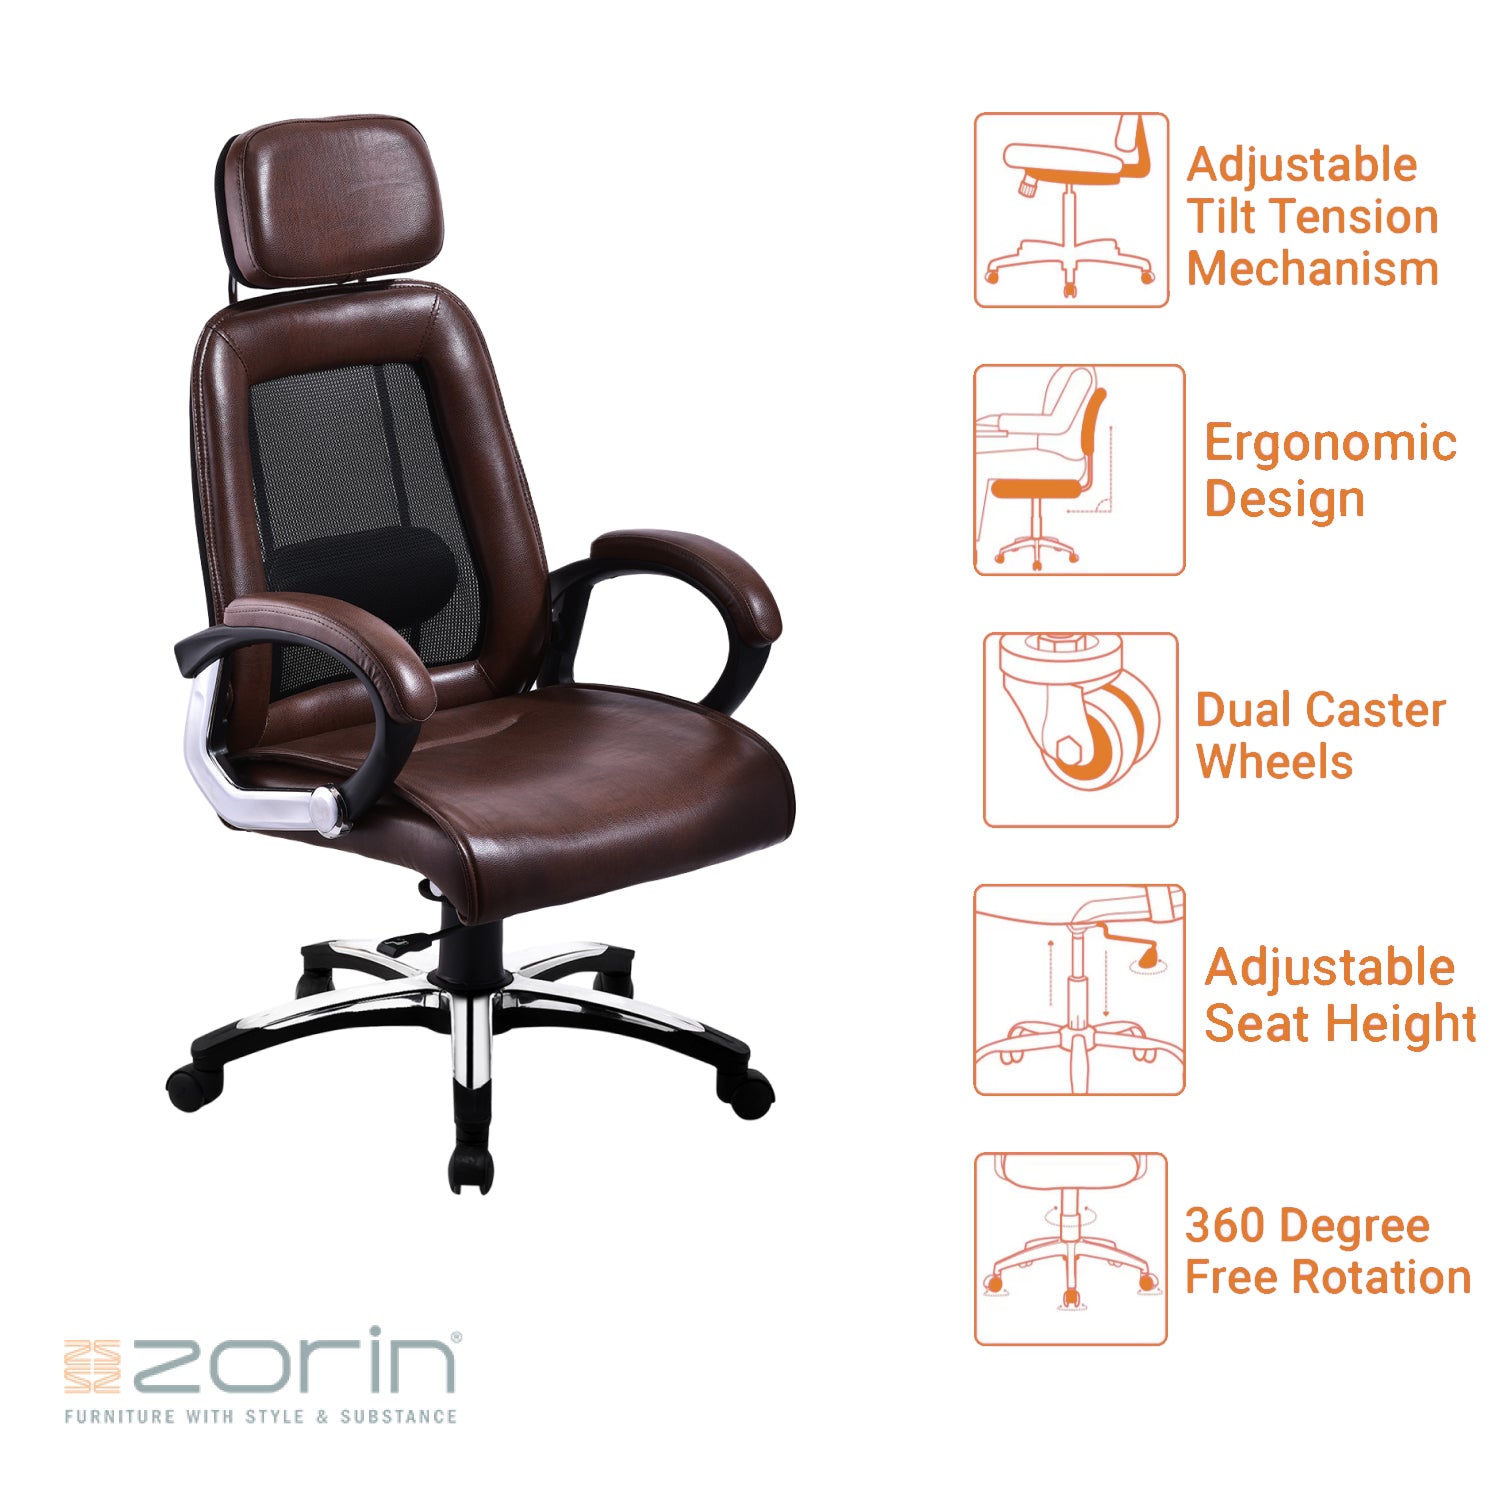 ZFE1019 High Back Chair by Zorin in BrownBlack Color Zorin